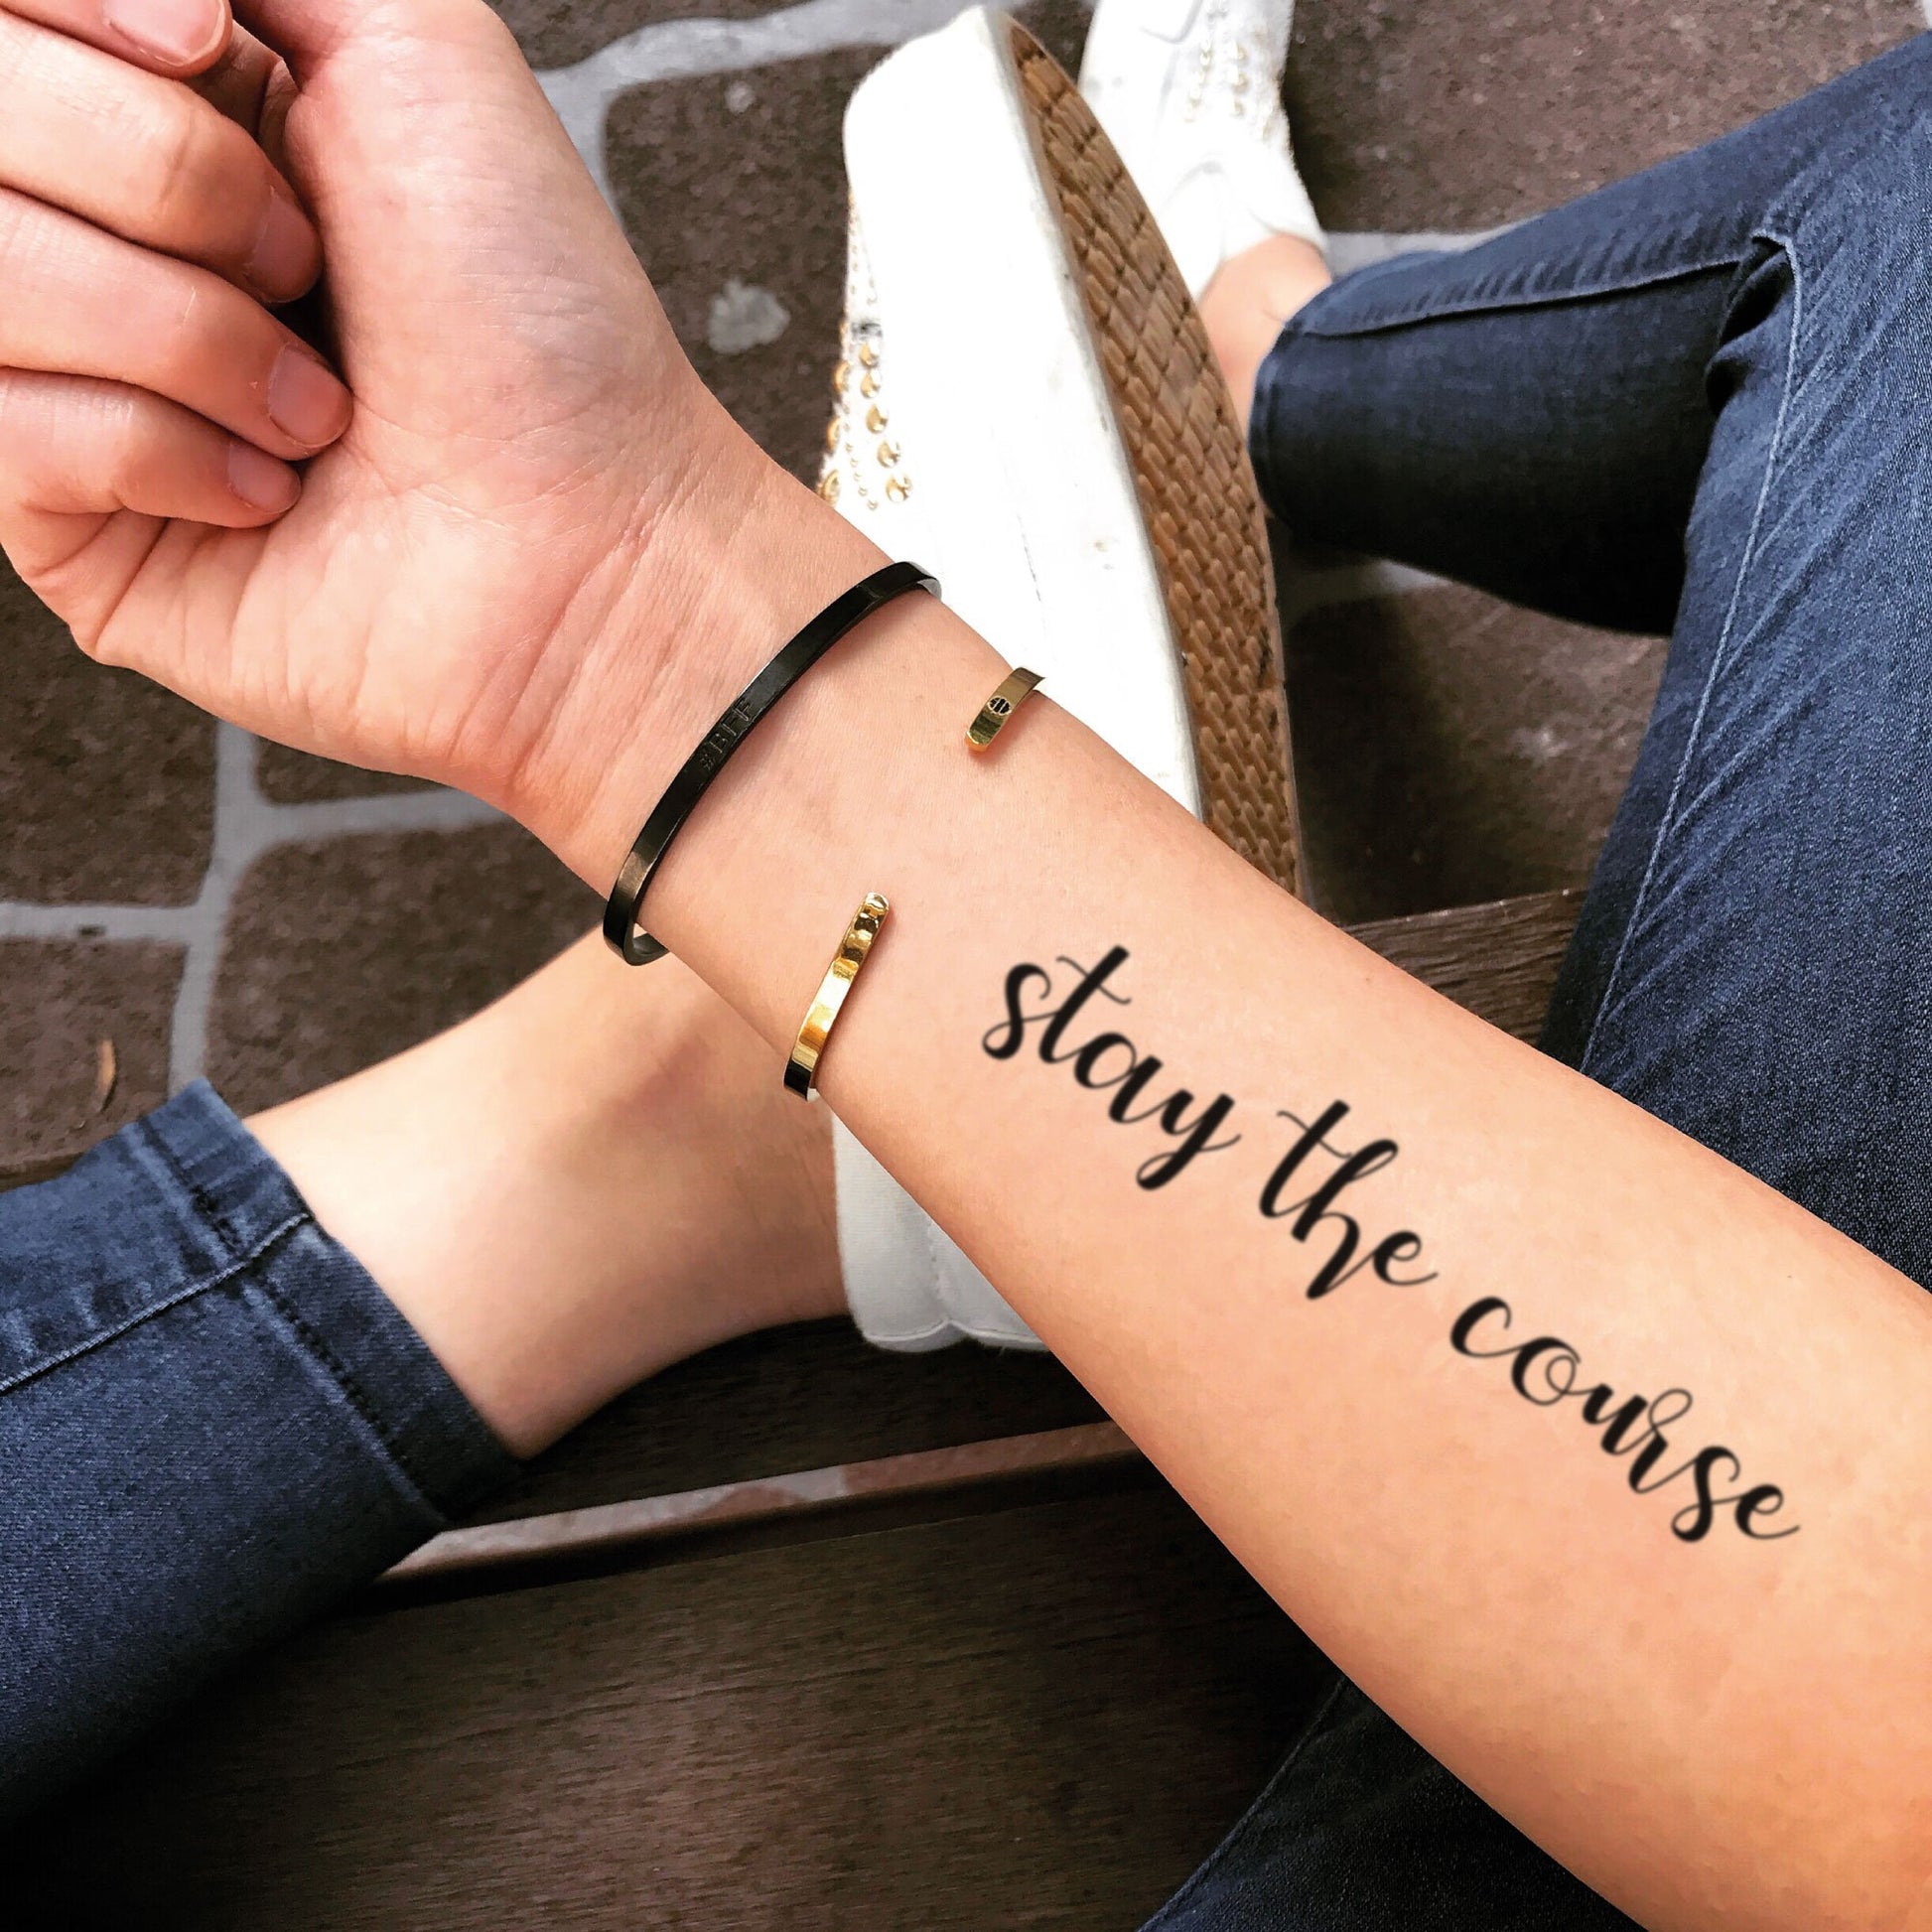 fake medium stay the course lettering temporary tattoo sticker design idea on forearm